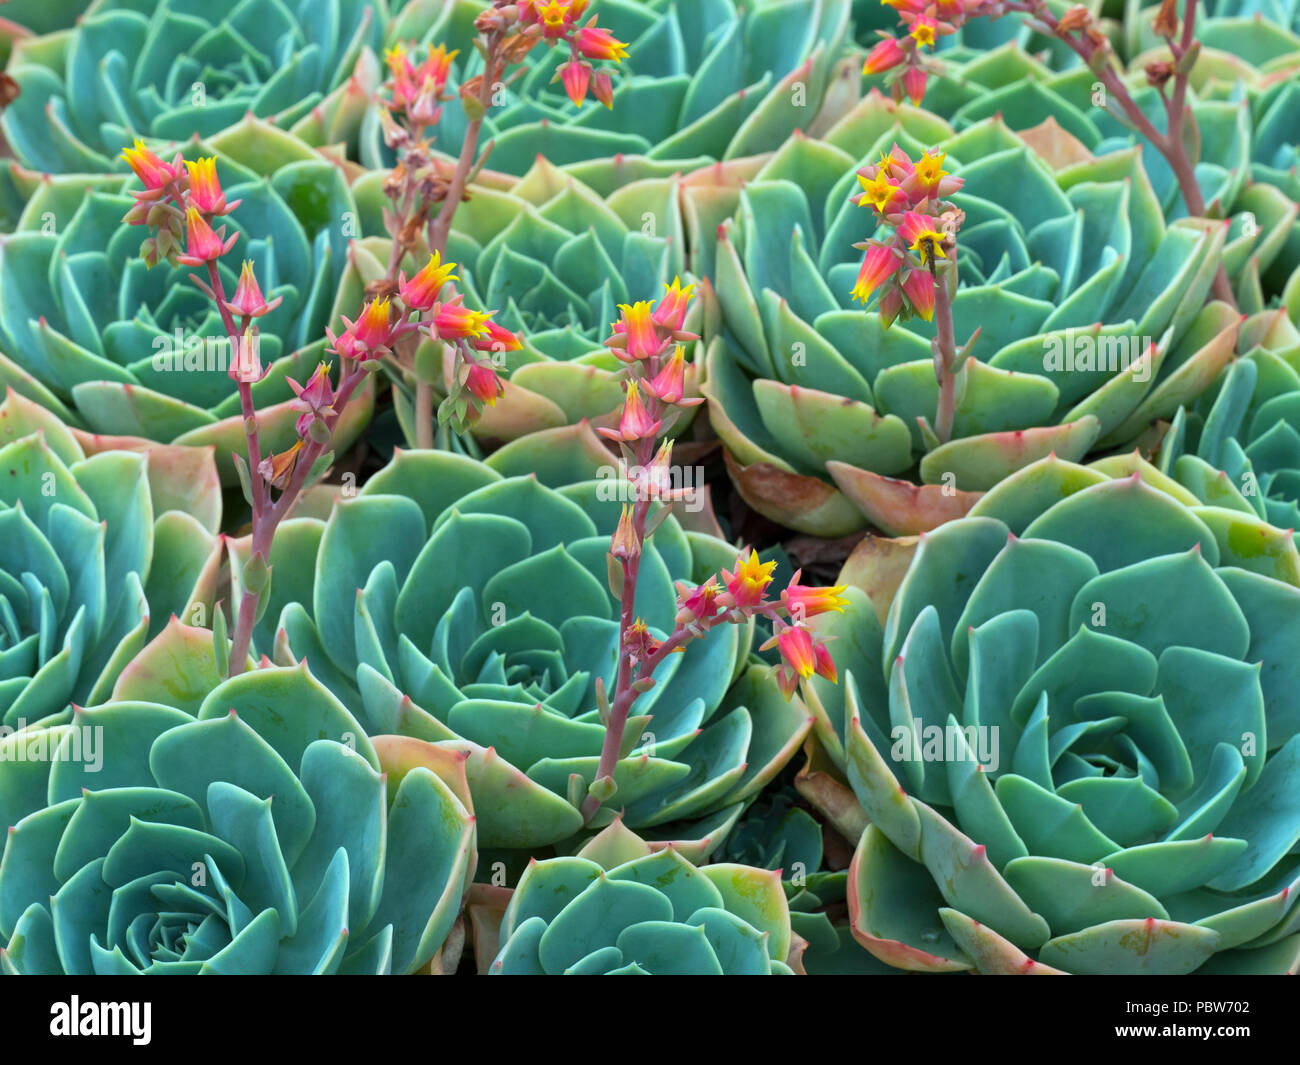 Old Hens and Chicks, Hens and Chicks, Blue Echeveria, Glaucous Echeveria in flower Stock Photo